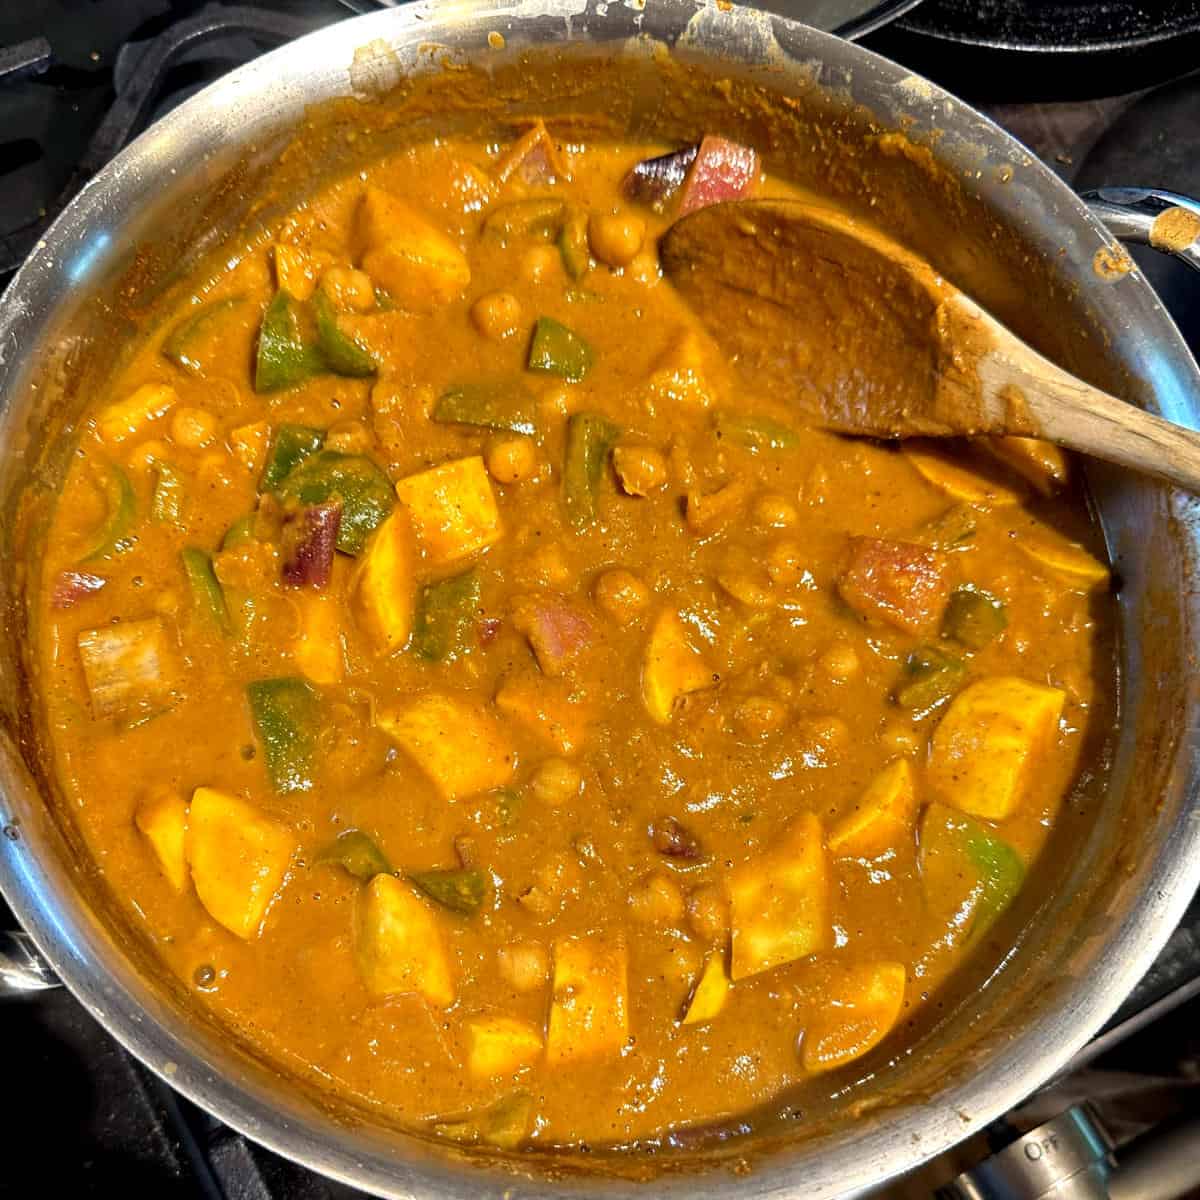 Vegetables and chickpeas simmered in tikka masala sauce.